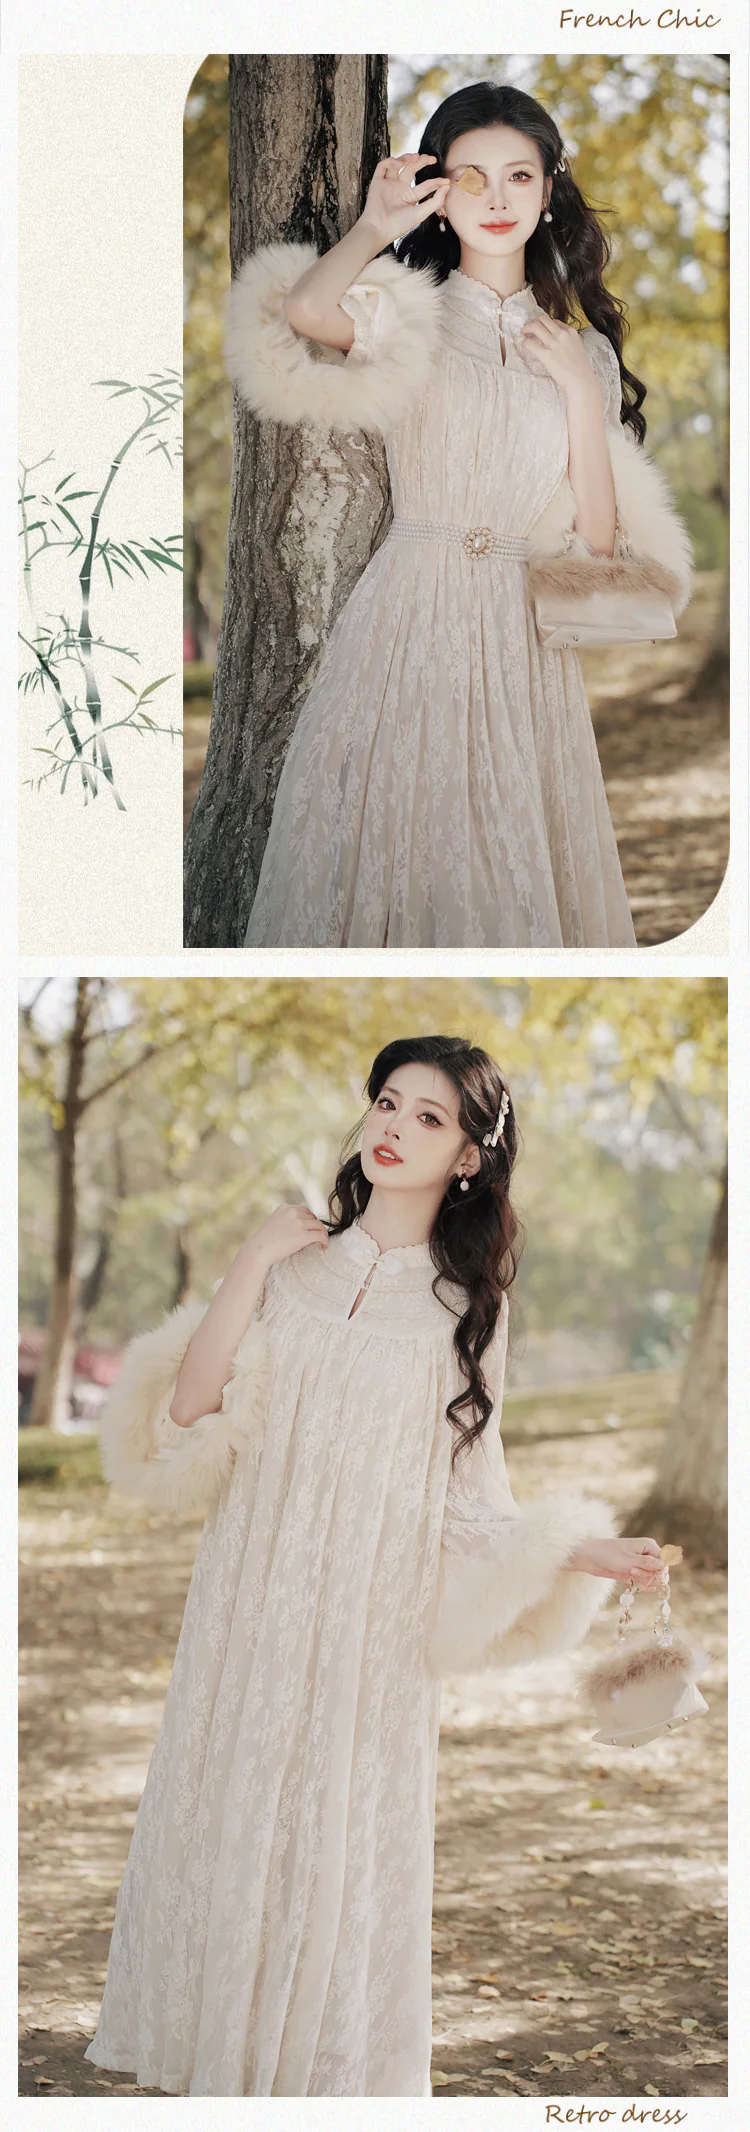 Romantic-Vintage-Sheer-Lace-Robe-French-Style-Fall-Winter-Casual-Dress09